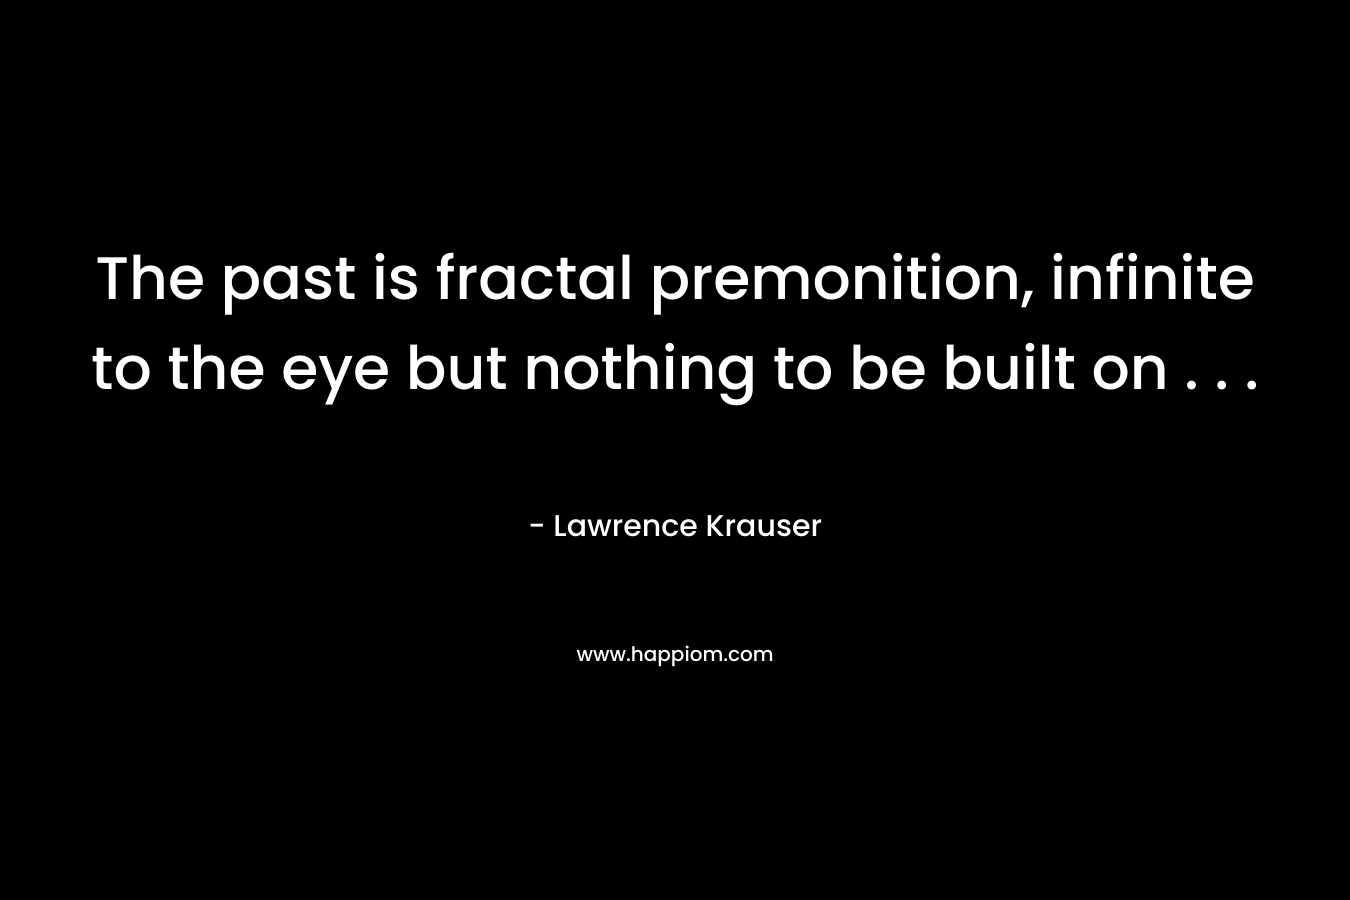 The past is fractal premonition, infinite to the eye but nothing to be built on . . . – Lawrence Krauser